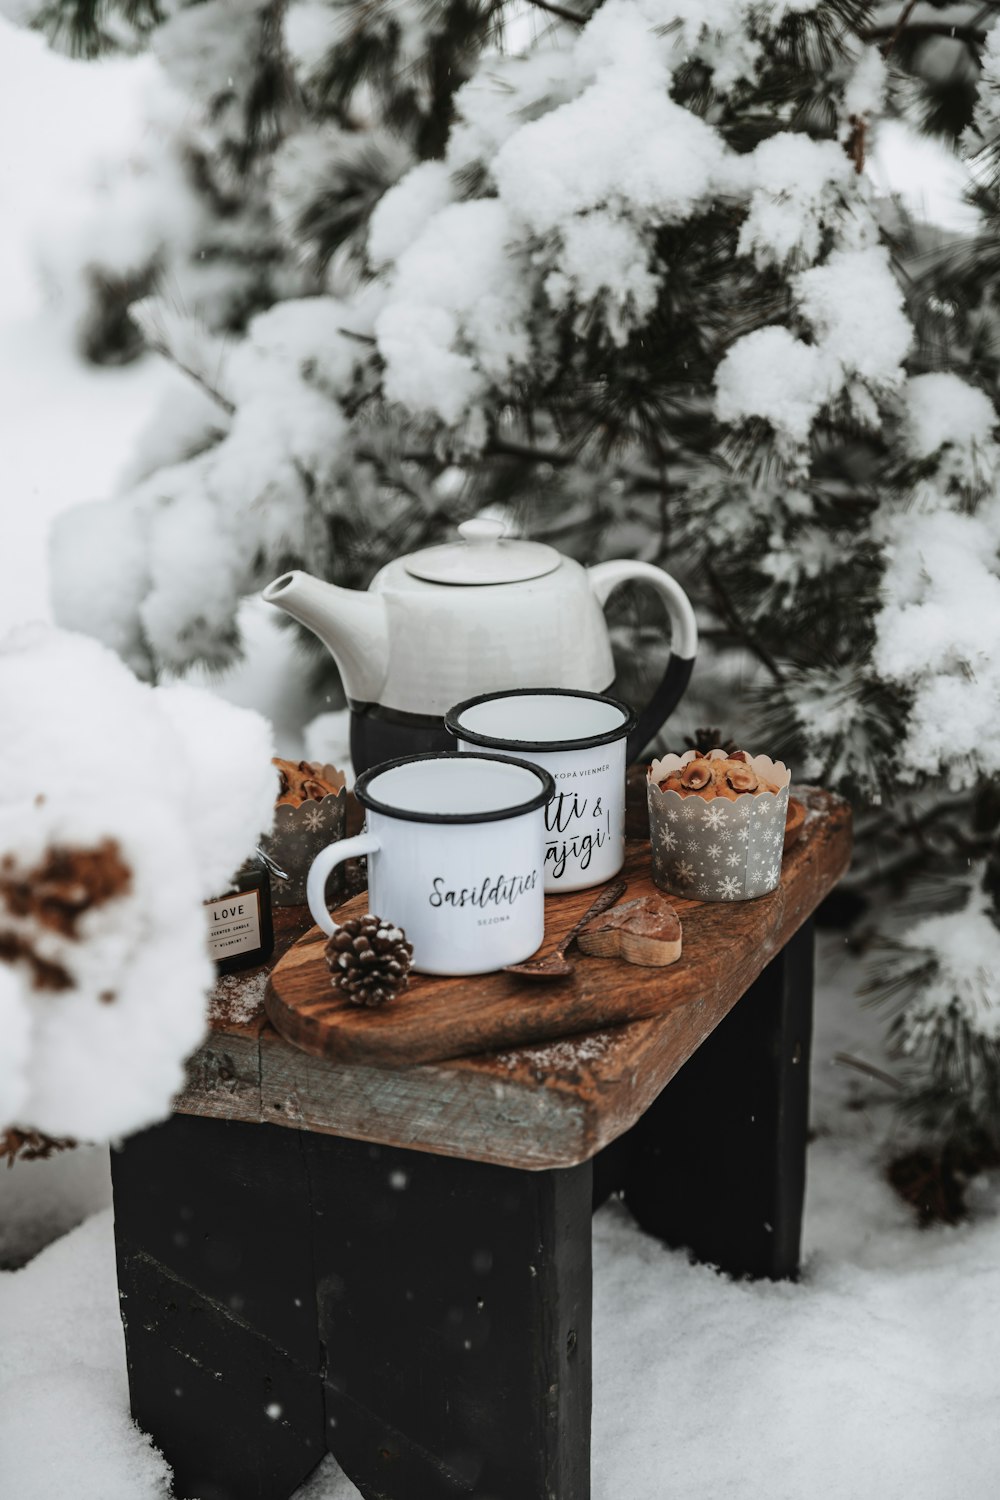 a table with cups and a teapot on it in the snow